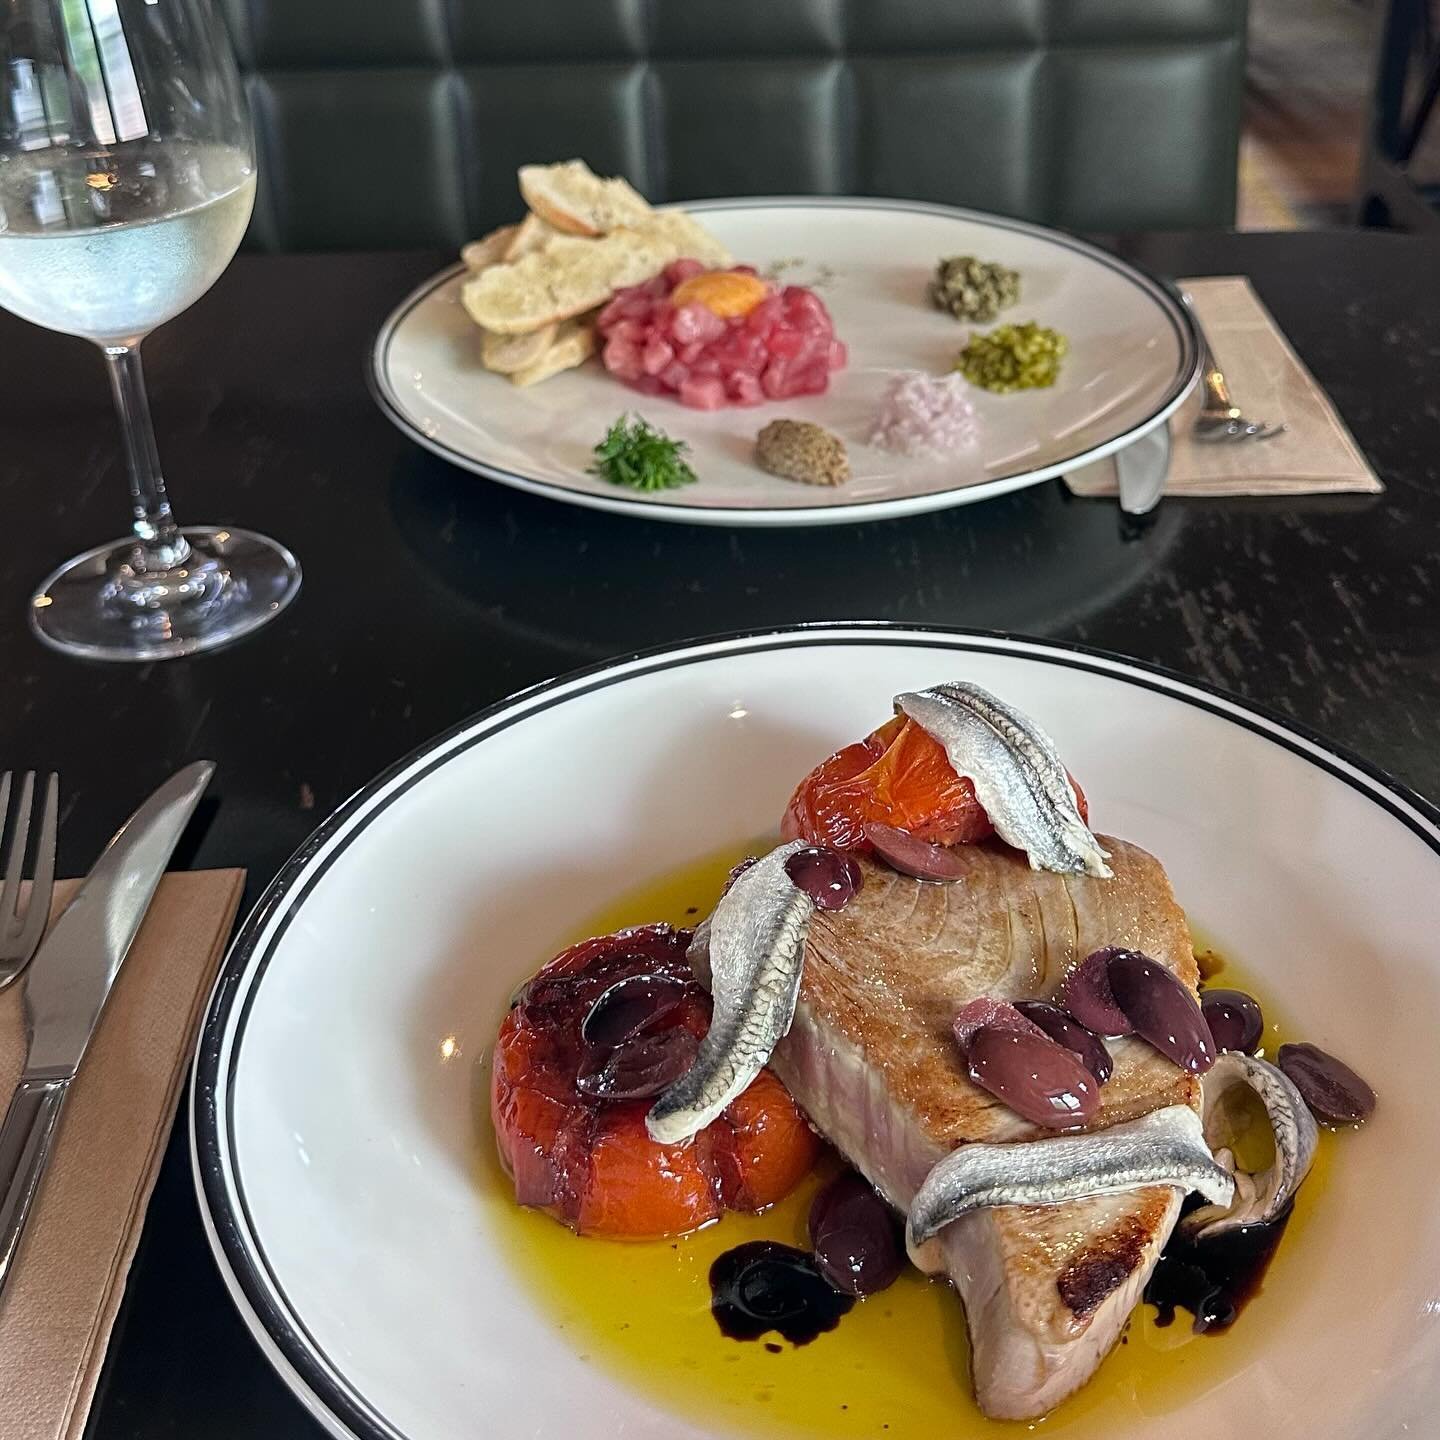 A 22kg Blue Fin tuna has hit the Specials menu! 🙌

Pictured here is 1. Seared Eden Blue Fin Tuna, slow roasted tomato, white anchovies, black olives, lemon oil, 10 year aged balsamic and 👉 2. Eden Blue Fin Tuna Tartare, capers, eschalot, cornichons